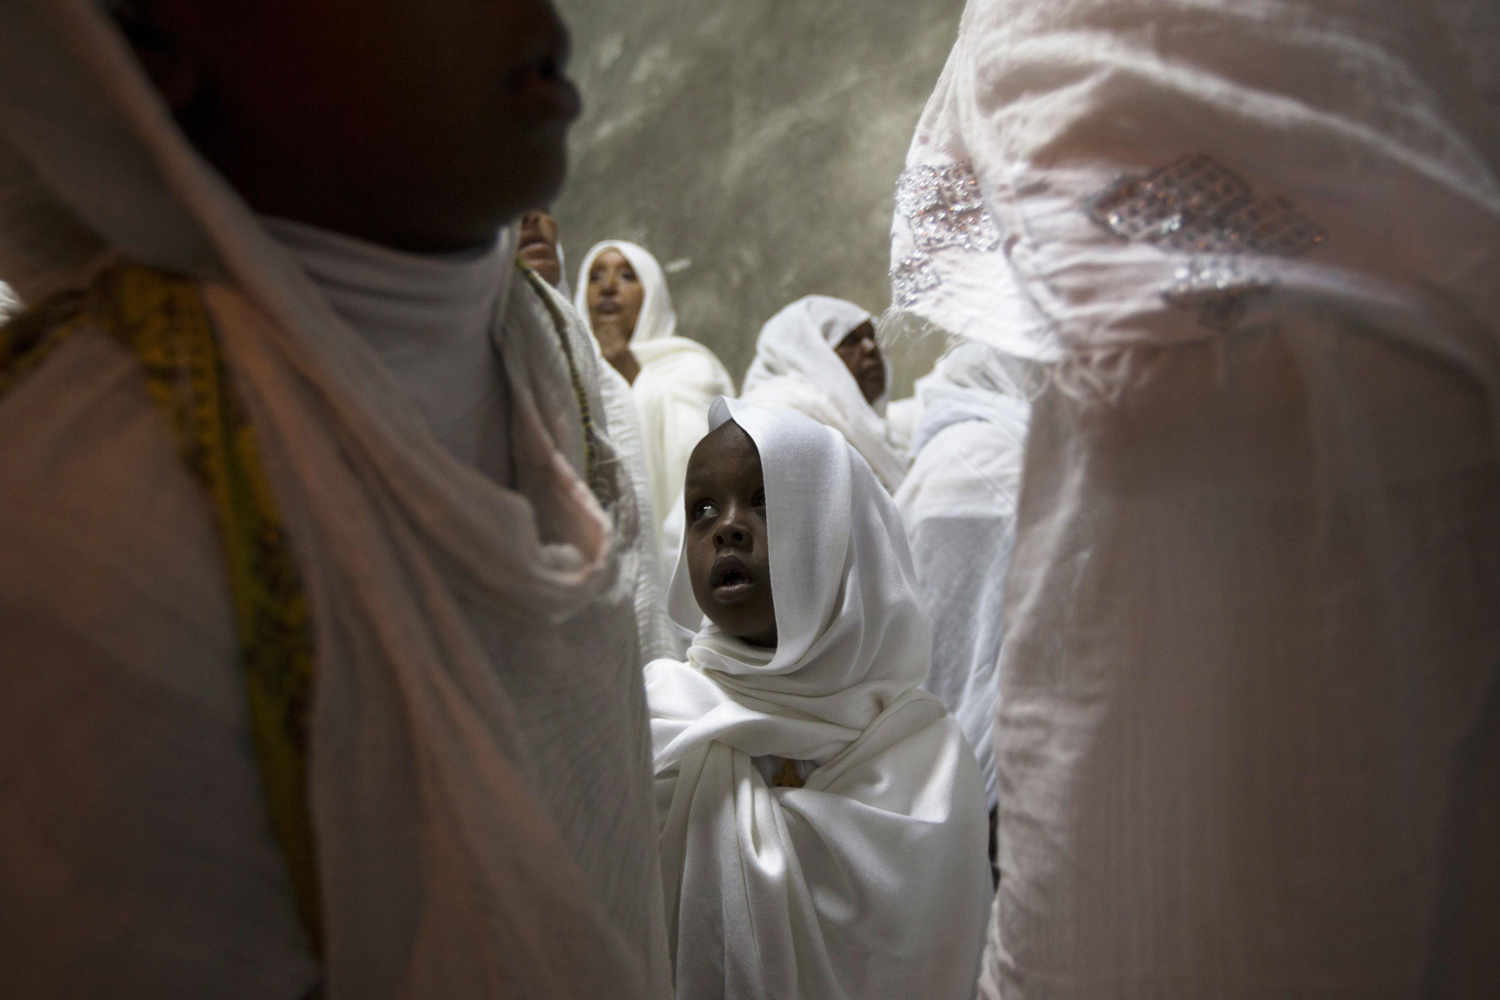 Ethiopian Orthodox worshippers attend the washing of the feet ceremony in Jerusalem's Old City